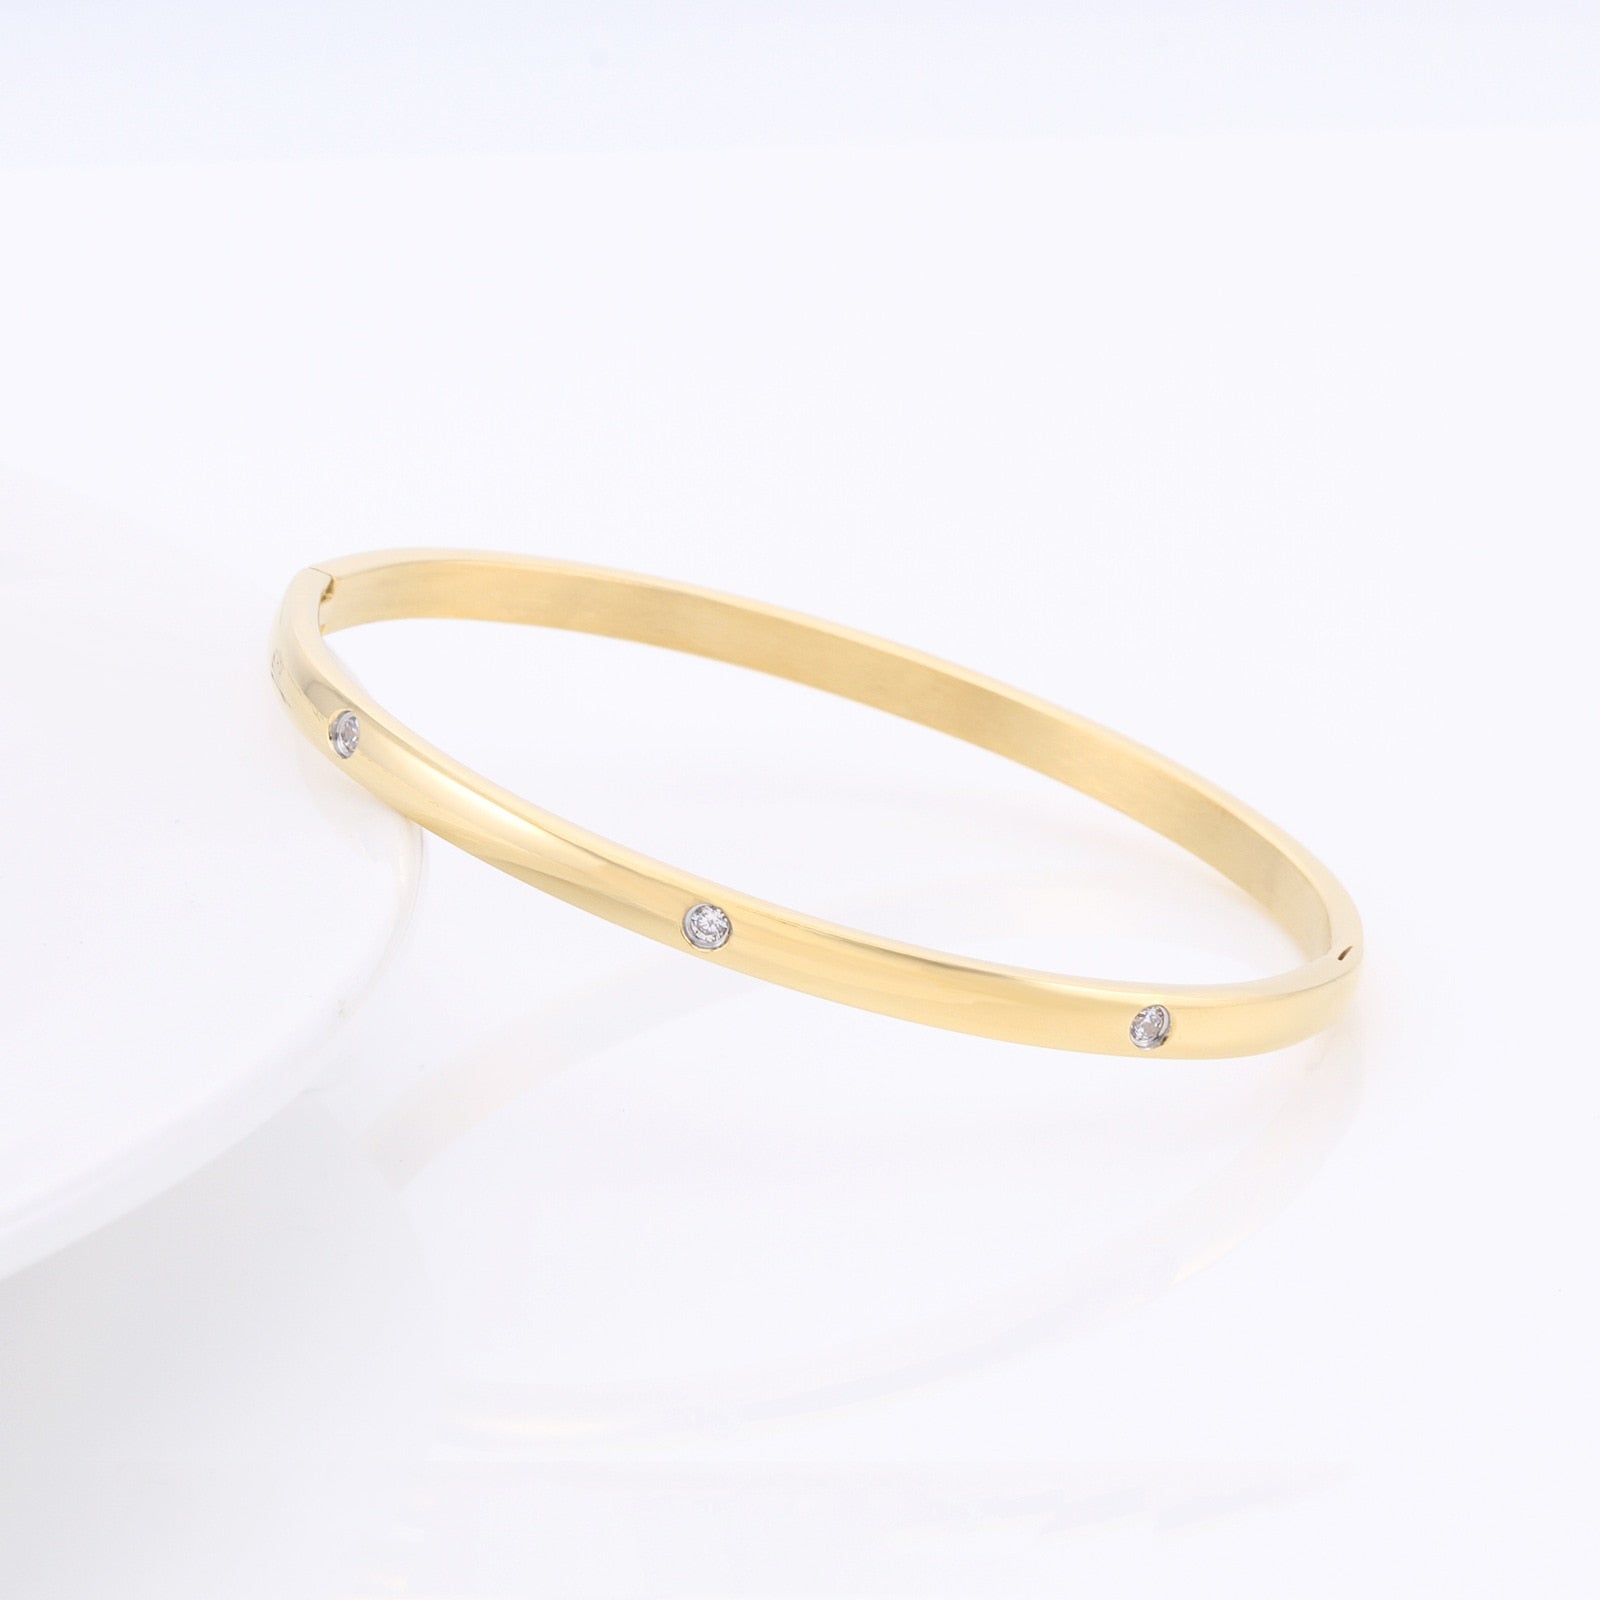 Fashion Punk Gold Color Bangles for Women Men Trendy Stainless Steel Metal Bracelets Bohemian Jewelry Accessories Gift Wholesale